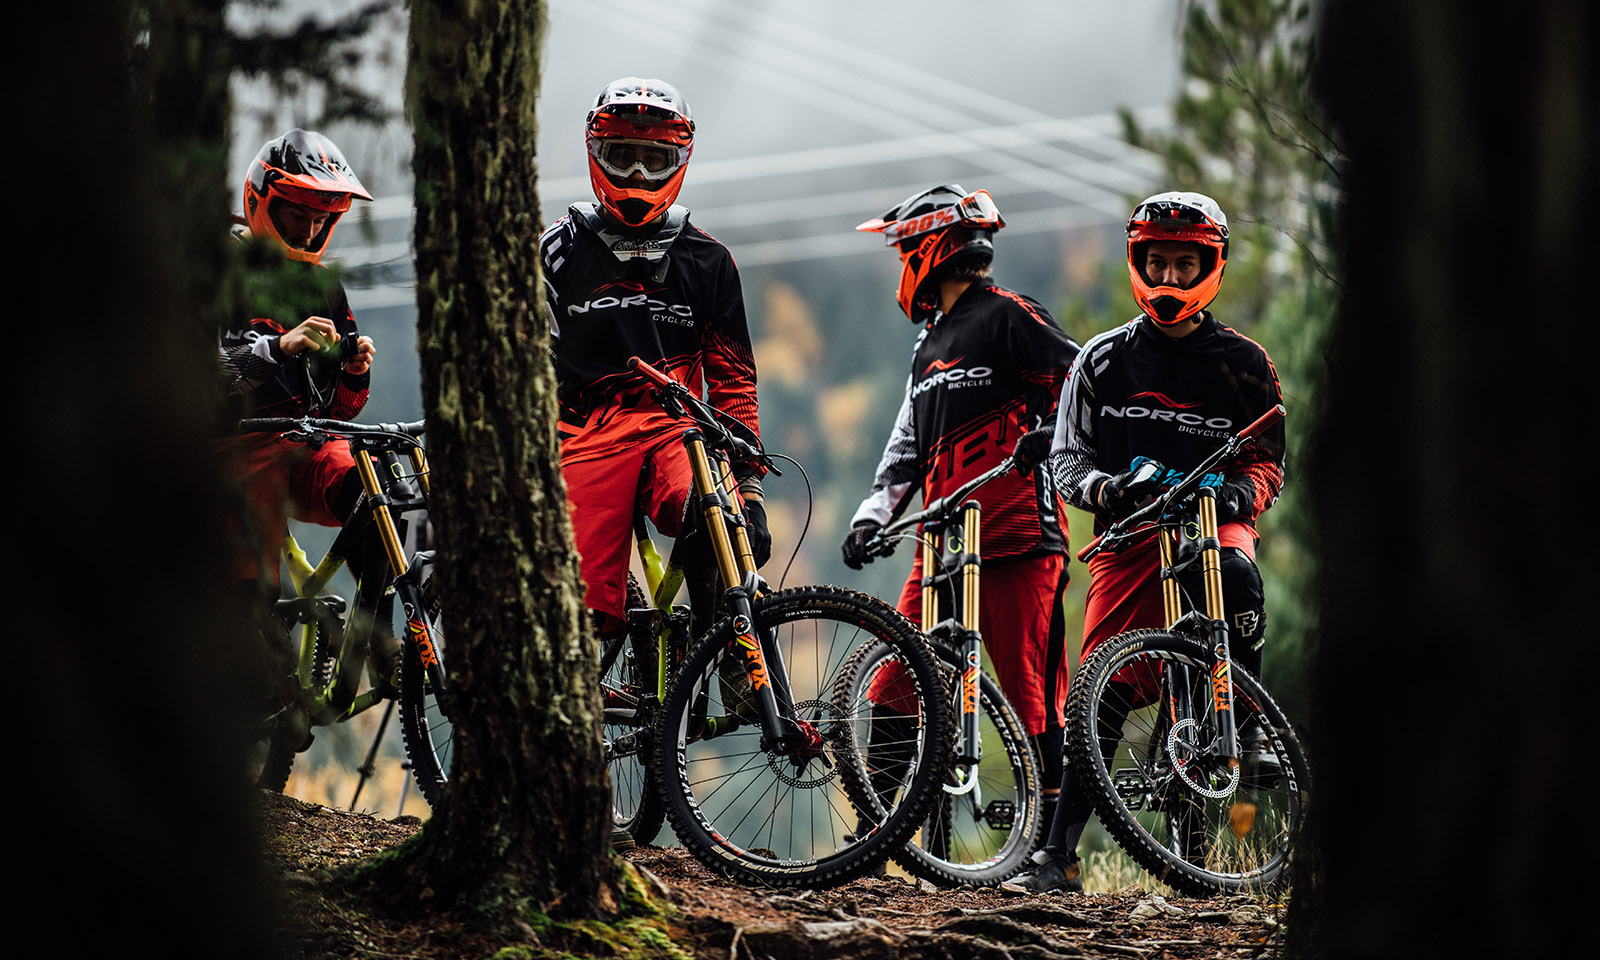 Norco Factory Team 2015 image by Margus Riga